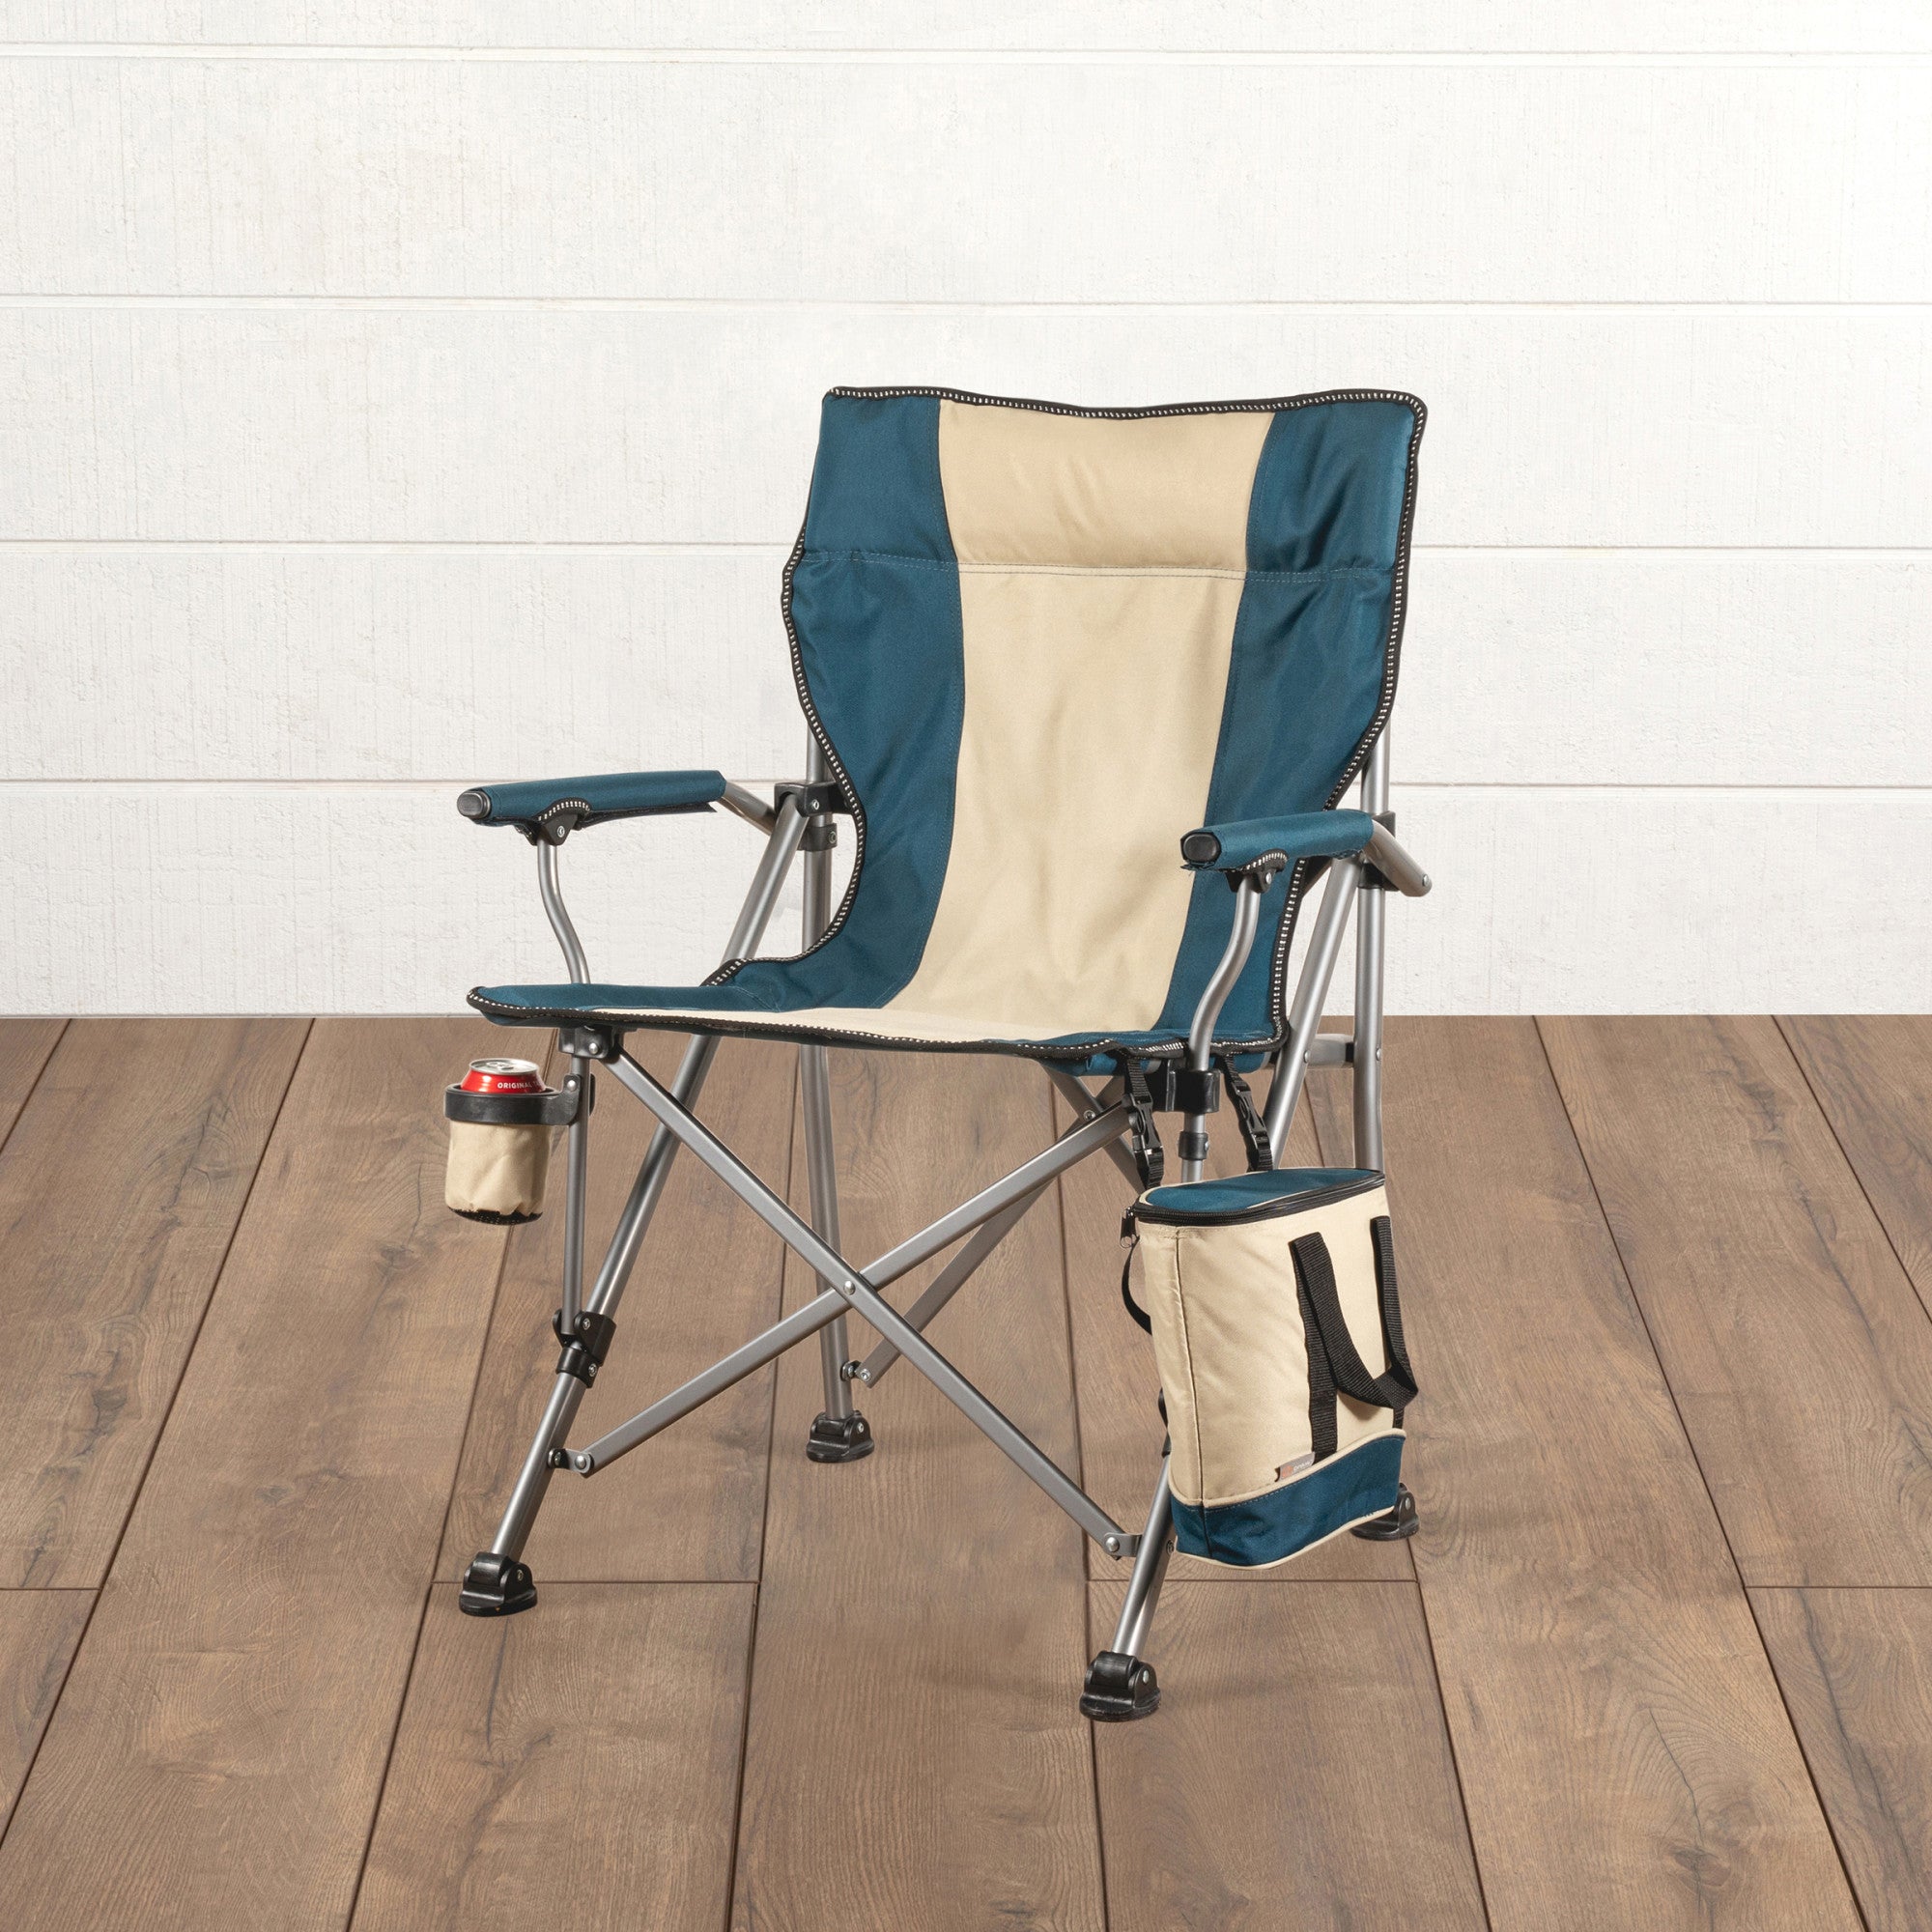 Outlander XL Camping Chair with Cooler